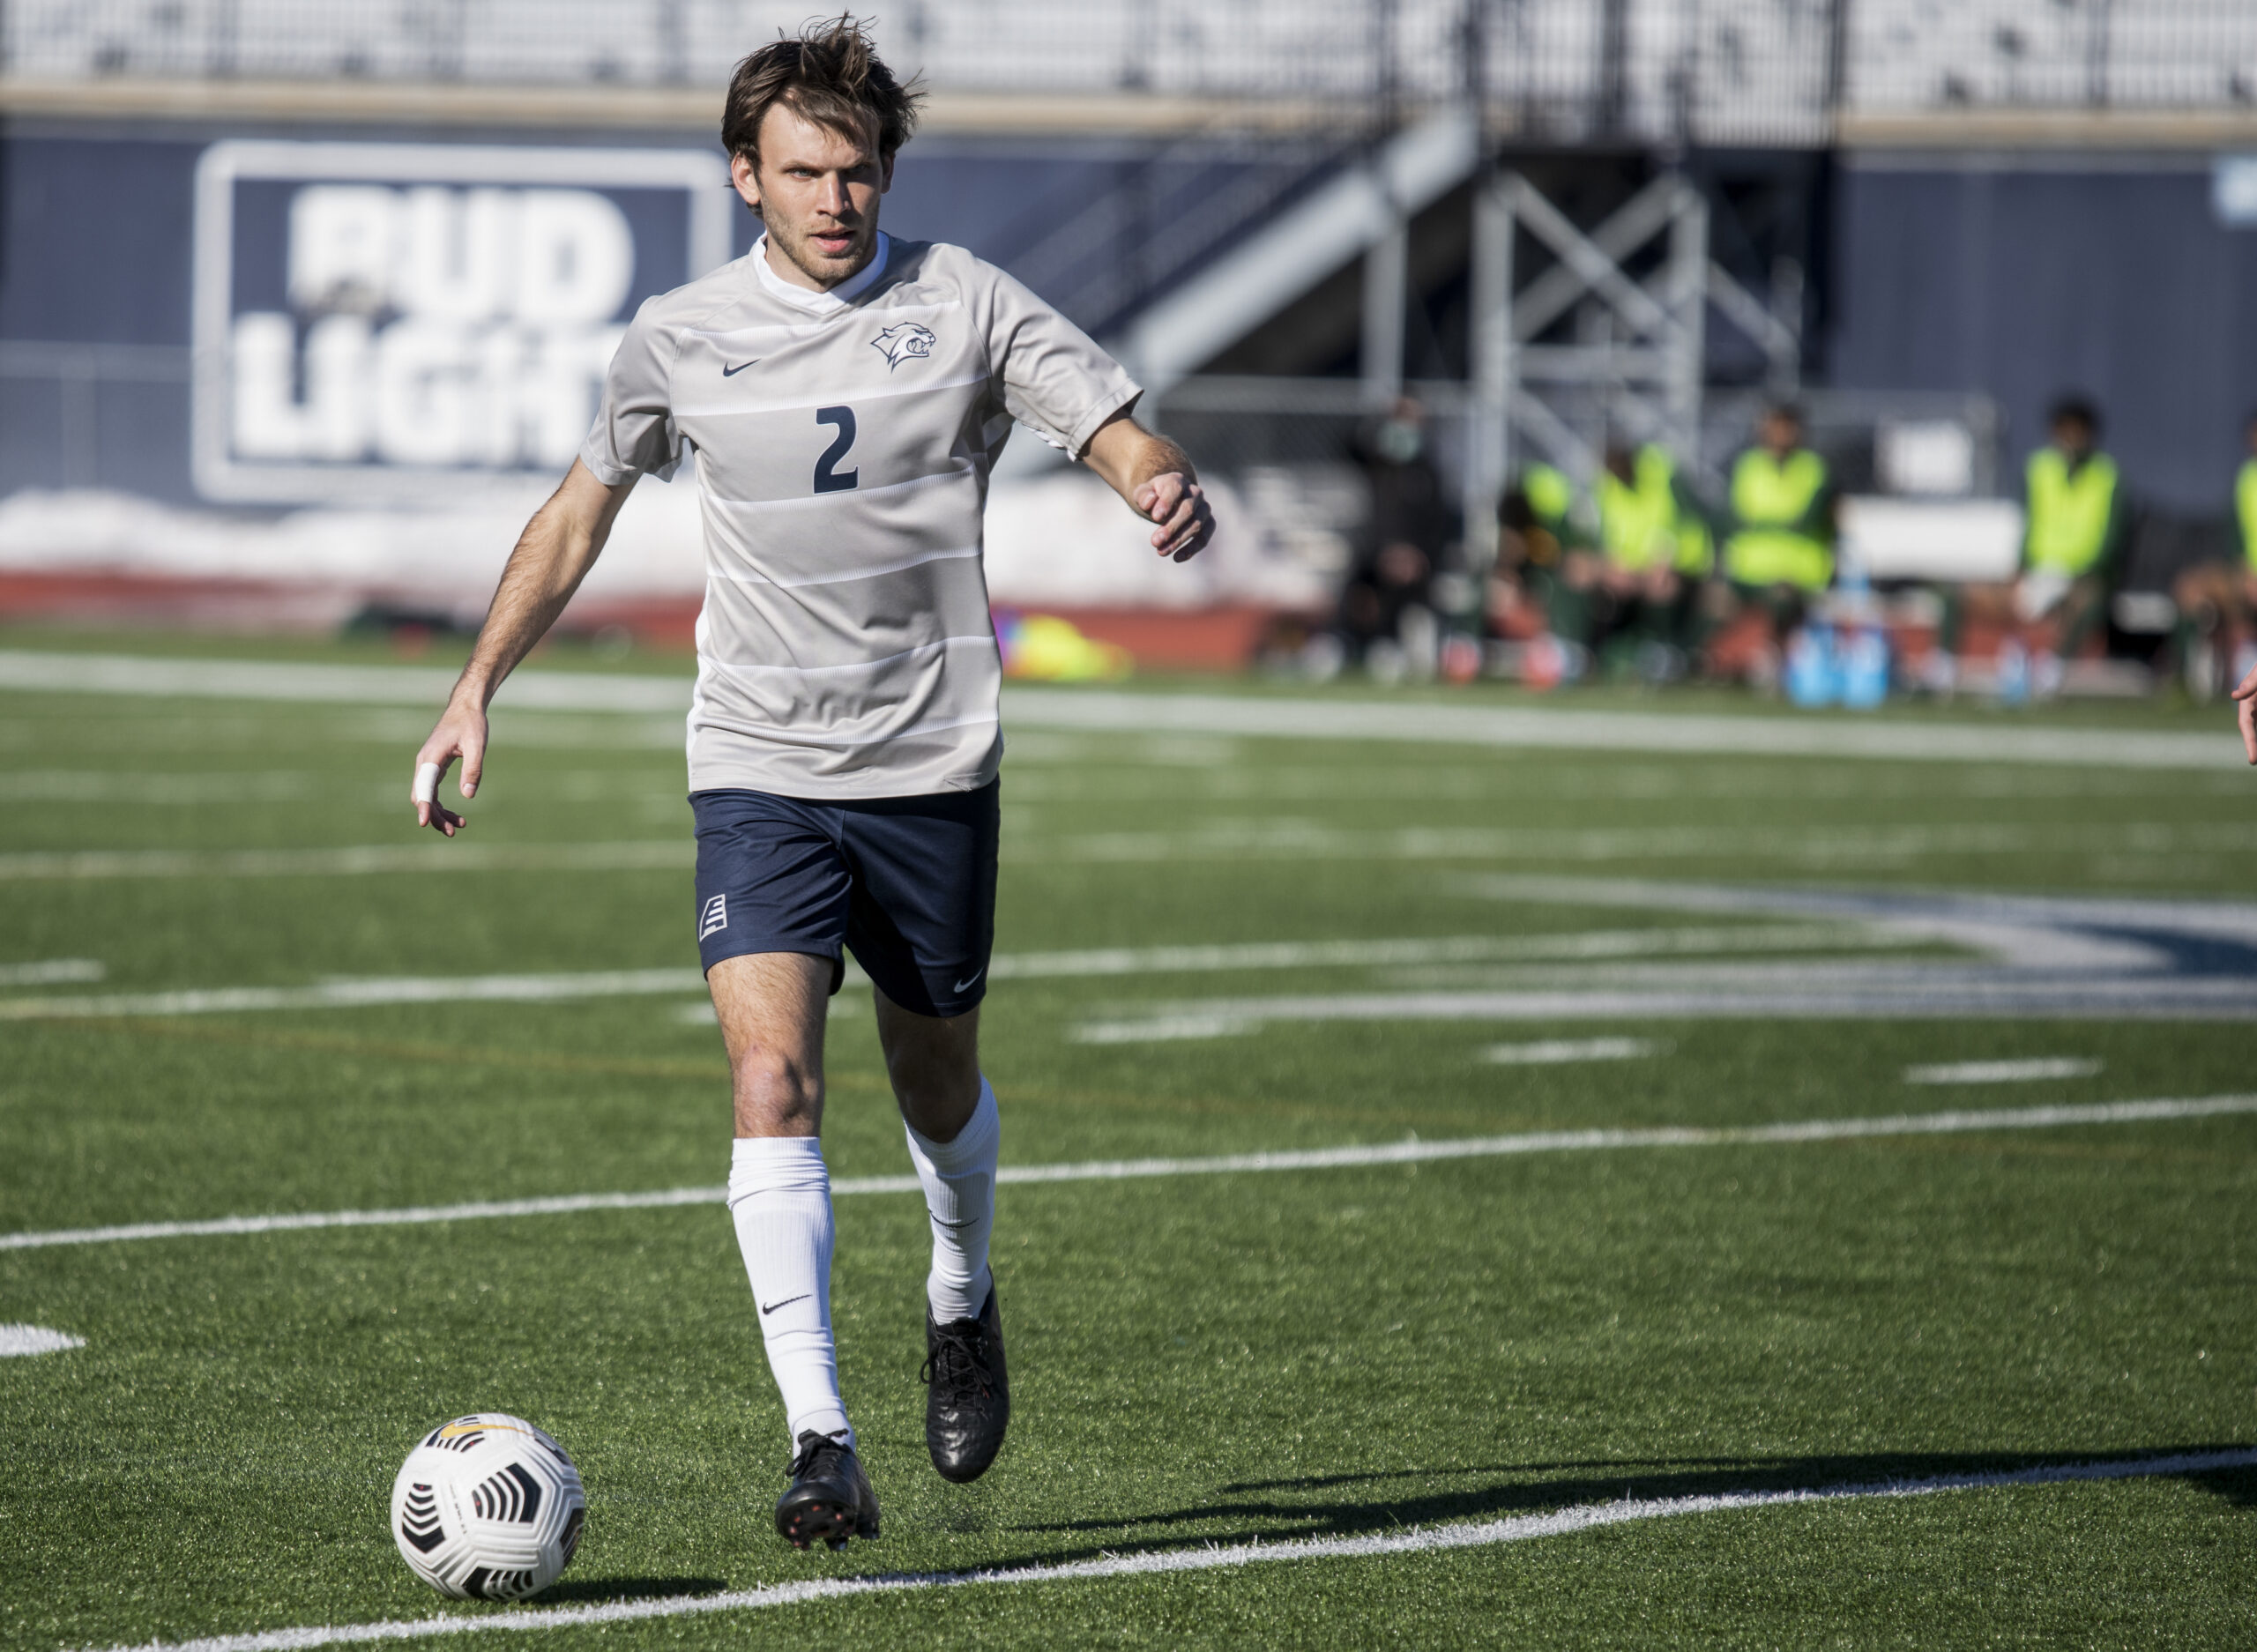 Wolf looks to finish UNH soccer career on high note